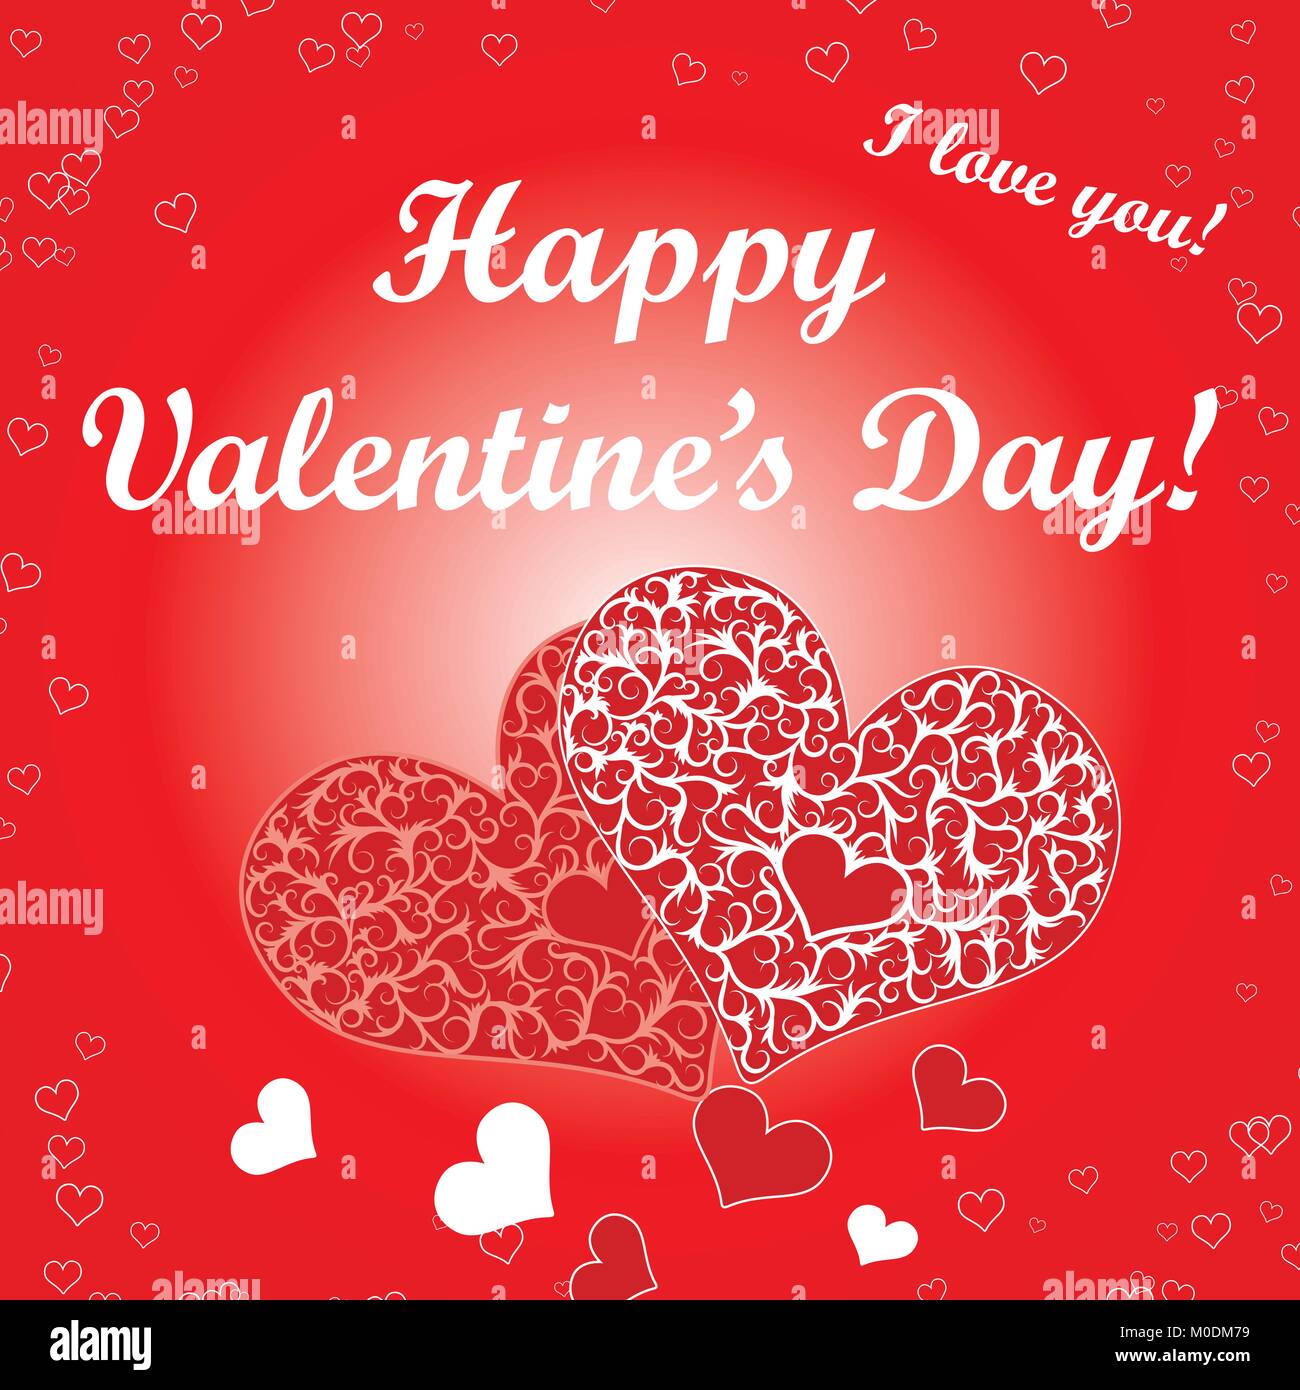 Greeting card Happy  Valentine s Day Vector illustration. Hearts Stock Vector